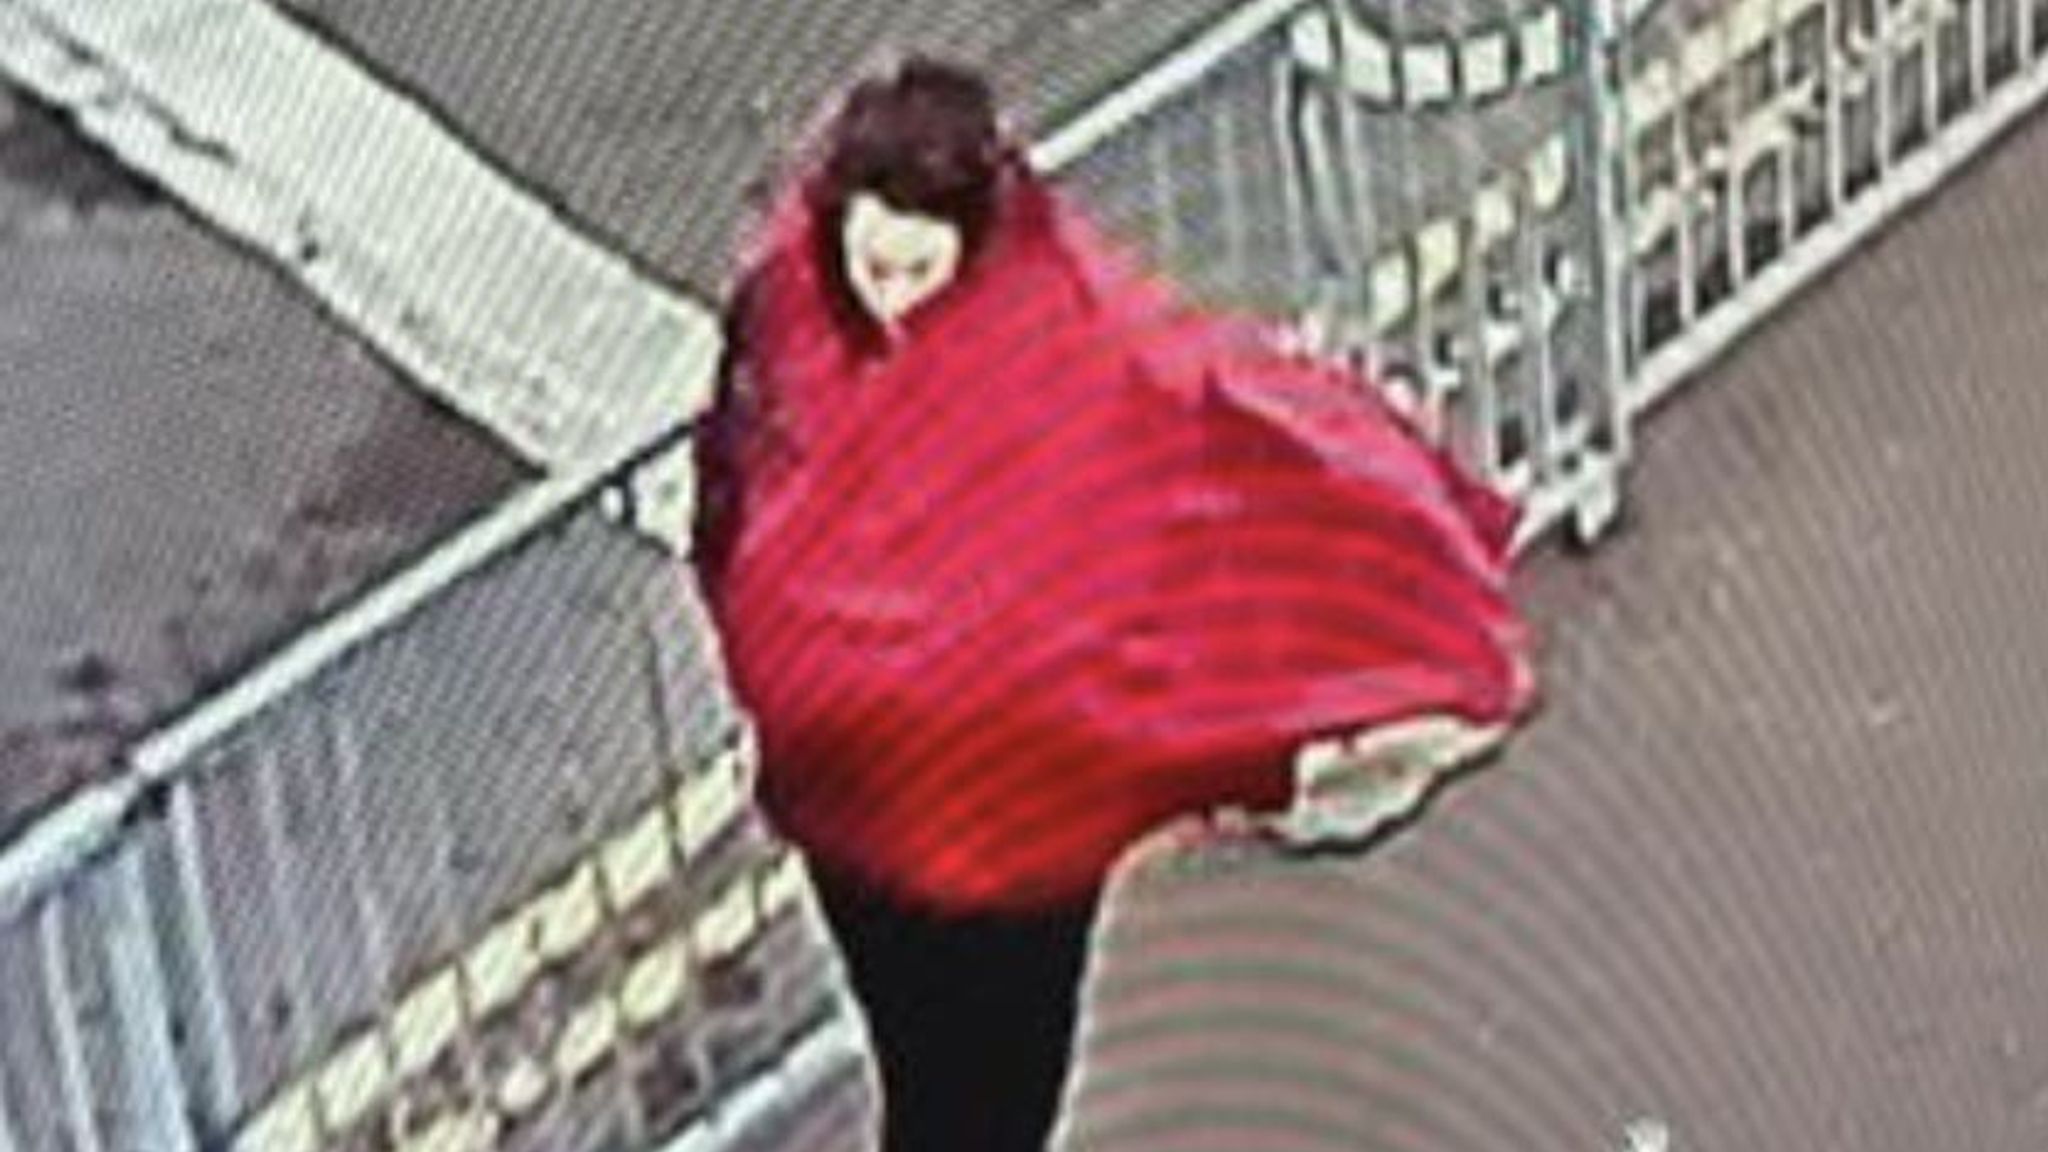 Police released a CCTV image of a woman believed to be Ms Marten in Essex